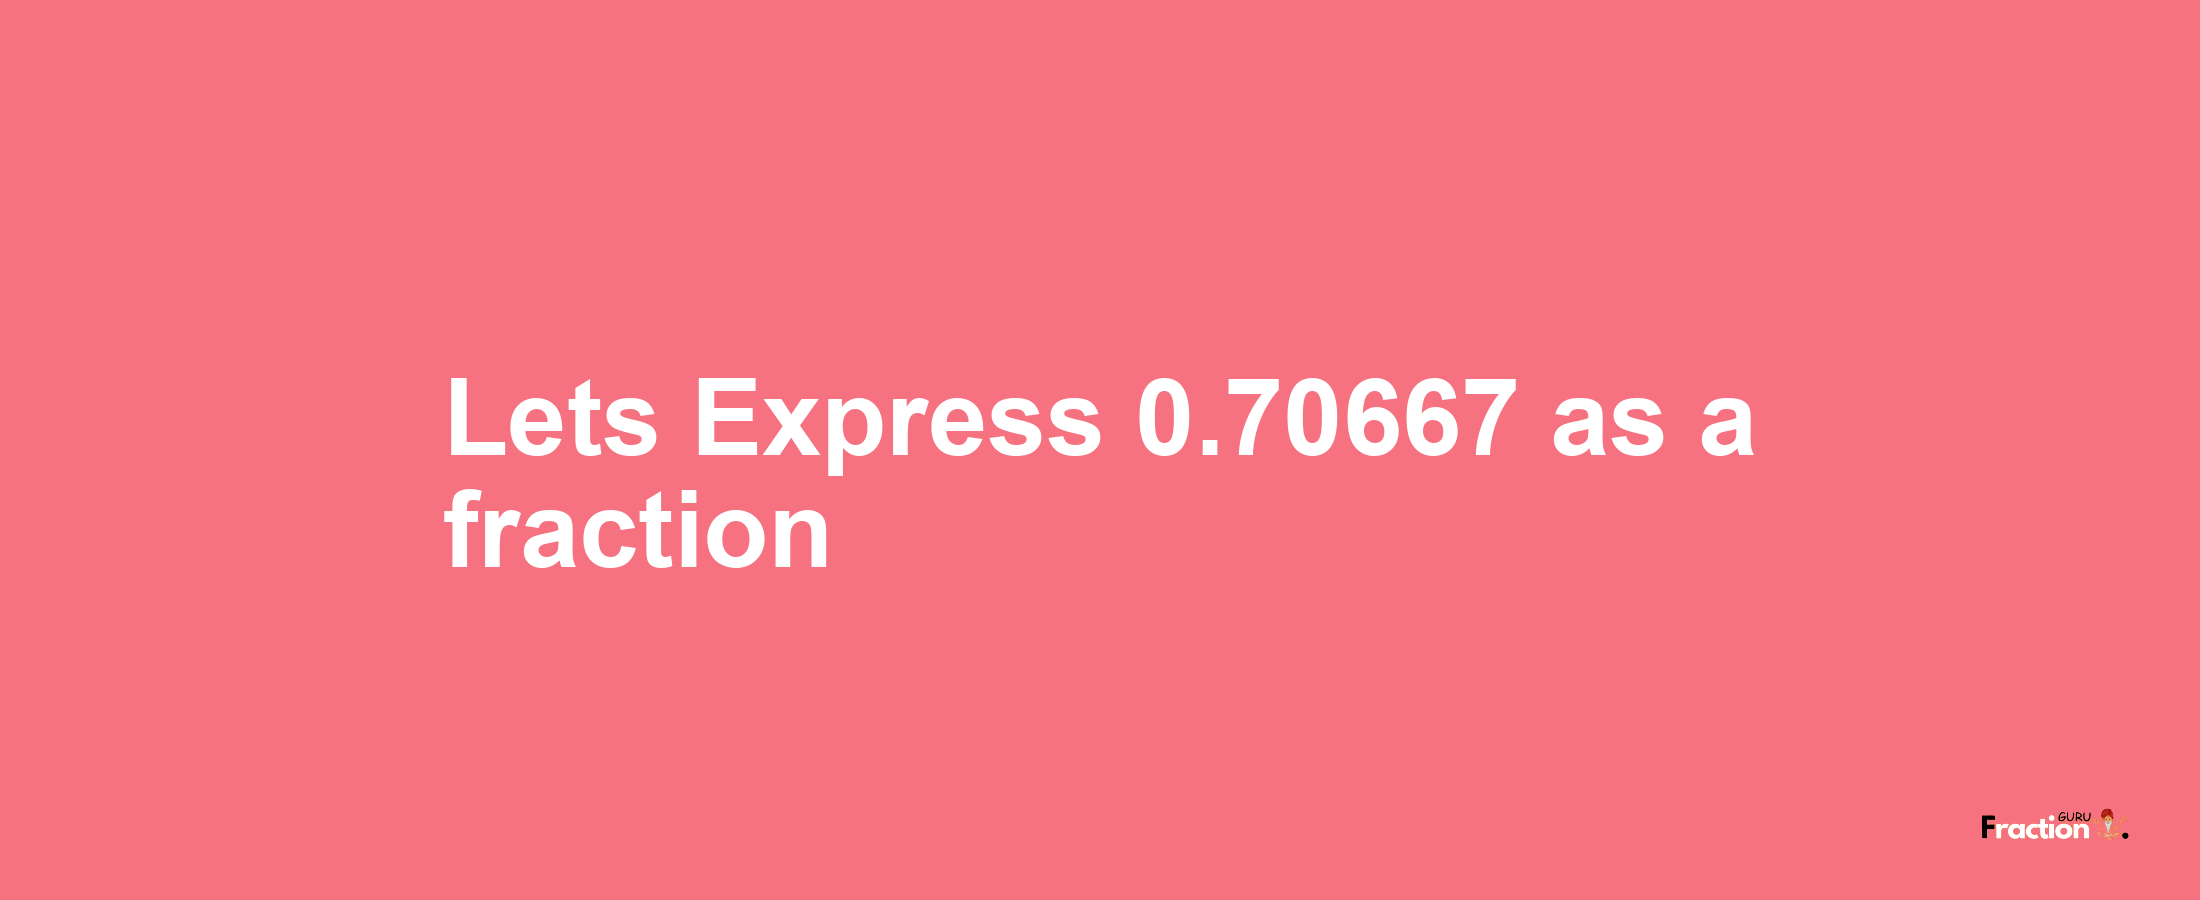 Lets Express 0.70667 as afraction